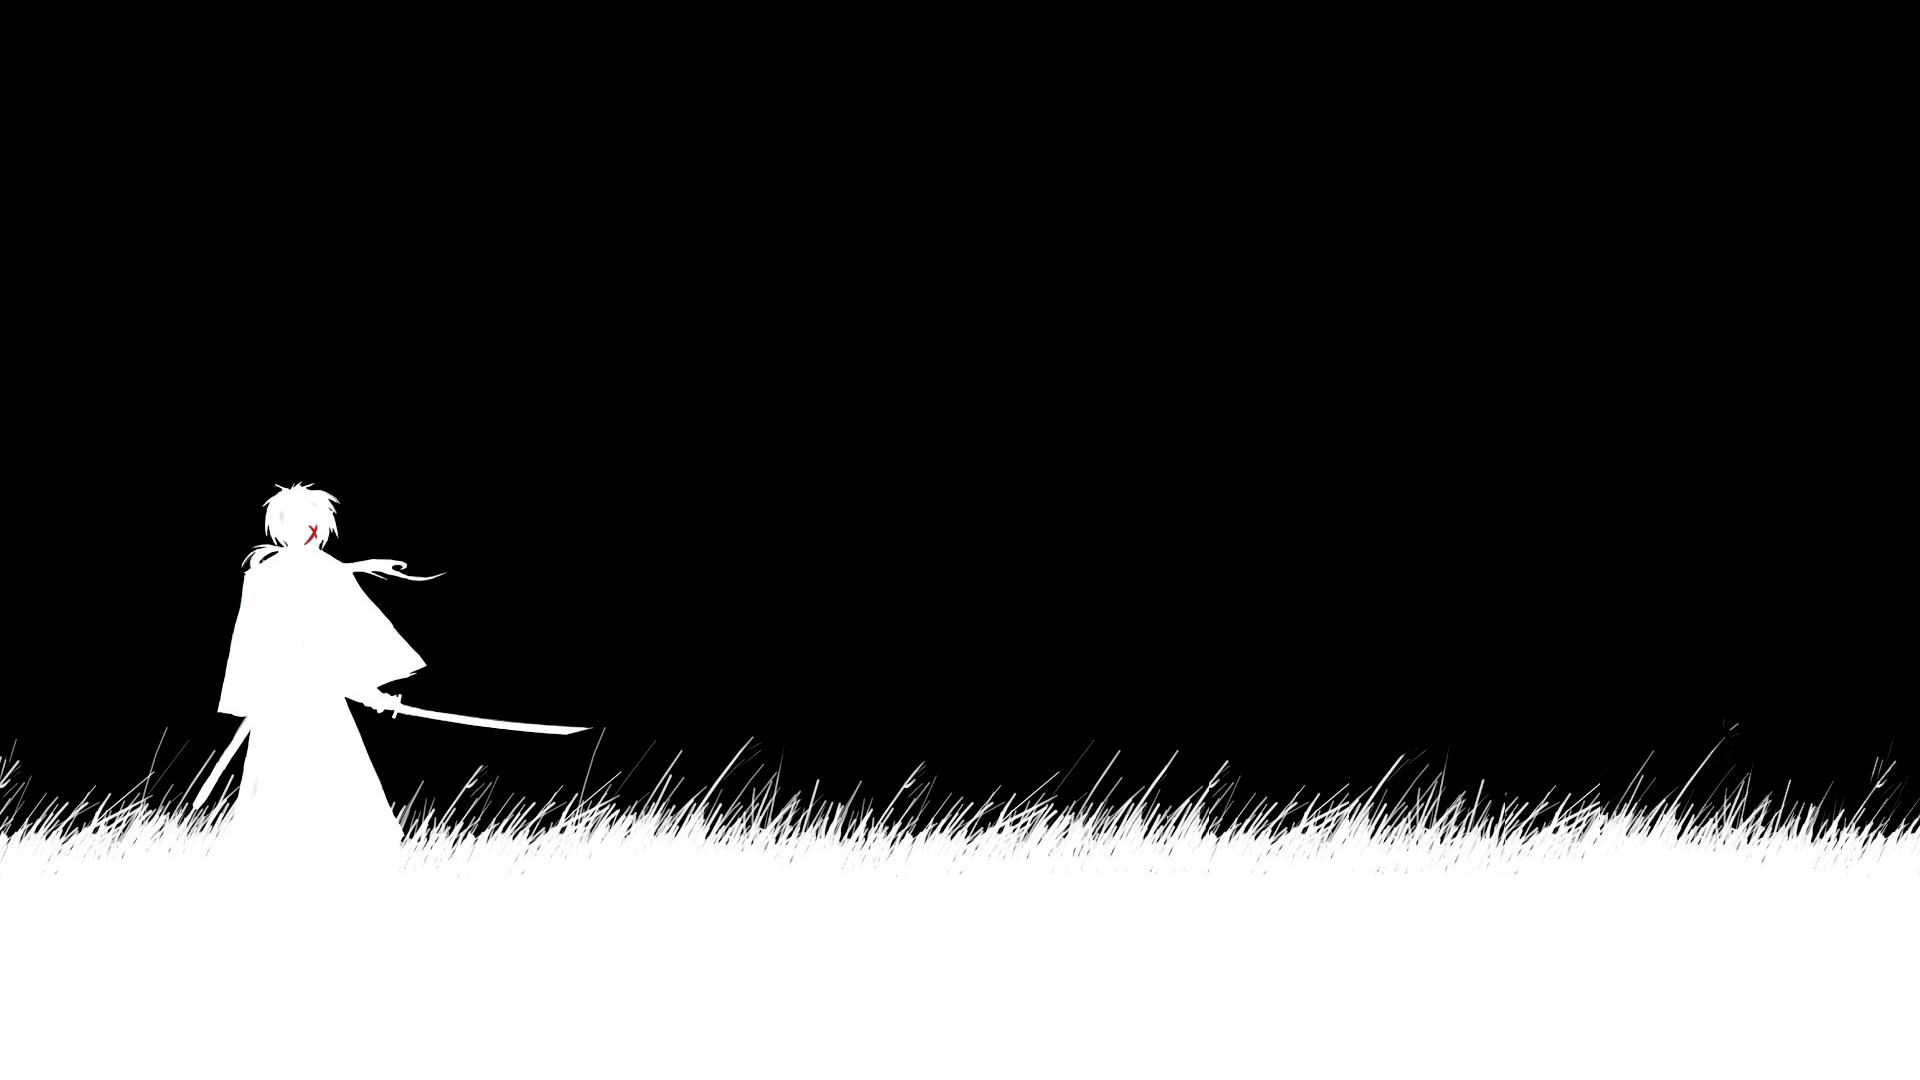 Wallpaper Samurai Space Black and White Silhouette Illustration  Background  Download Free Image